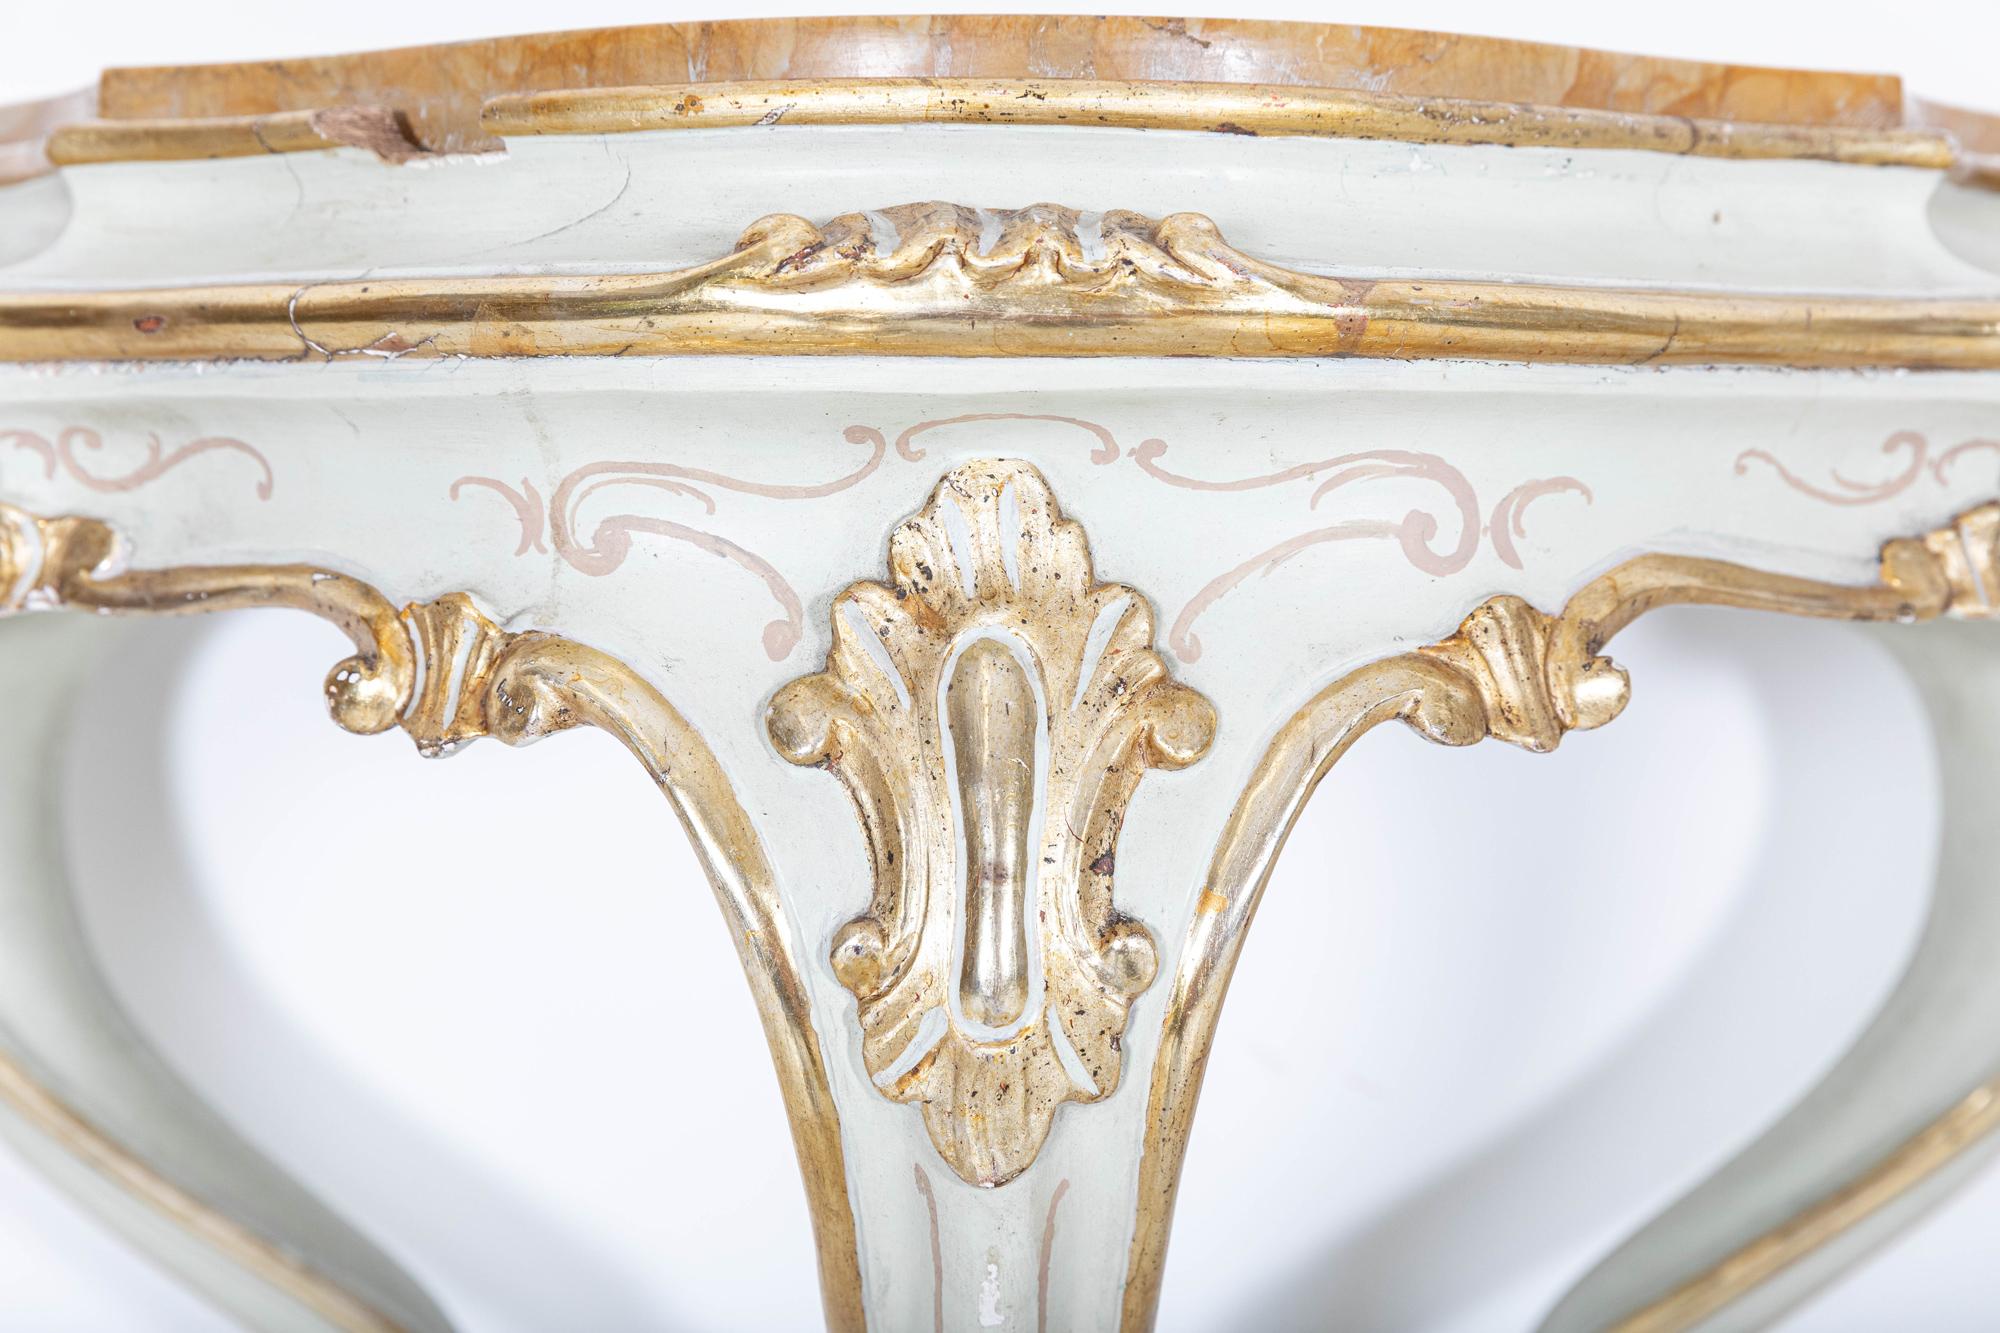 Circa 1950

Pair Venetian marble top wall console tables, hand painted and gilded.

Sourced from the South of France

Price per pair

sku 840

Measures: W59 x D34.5 x H67 cm.